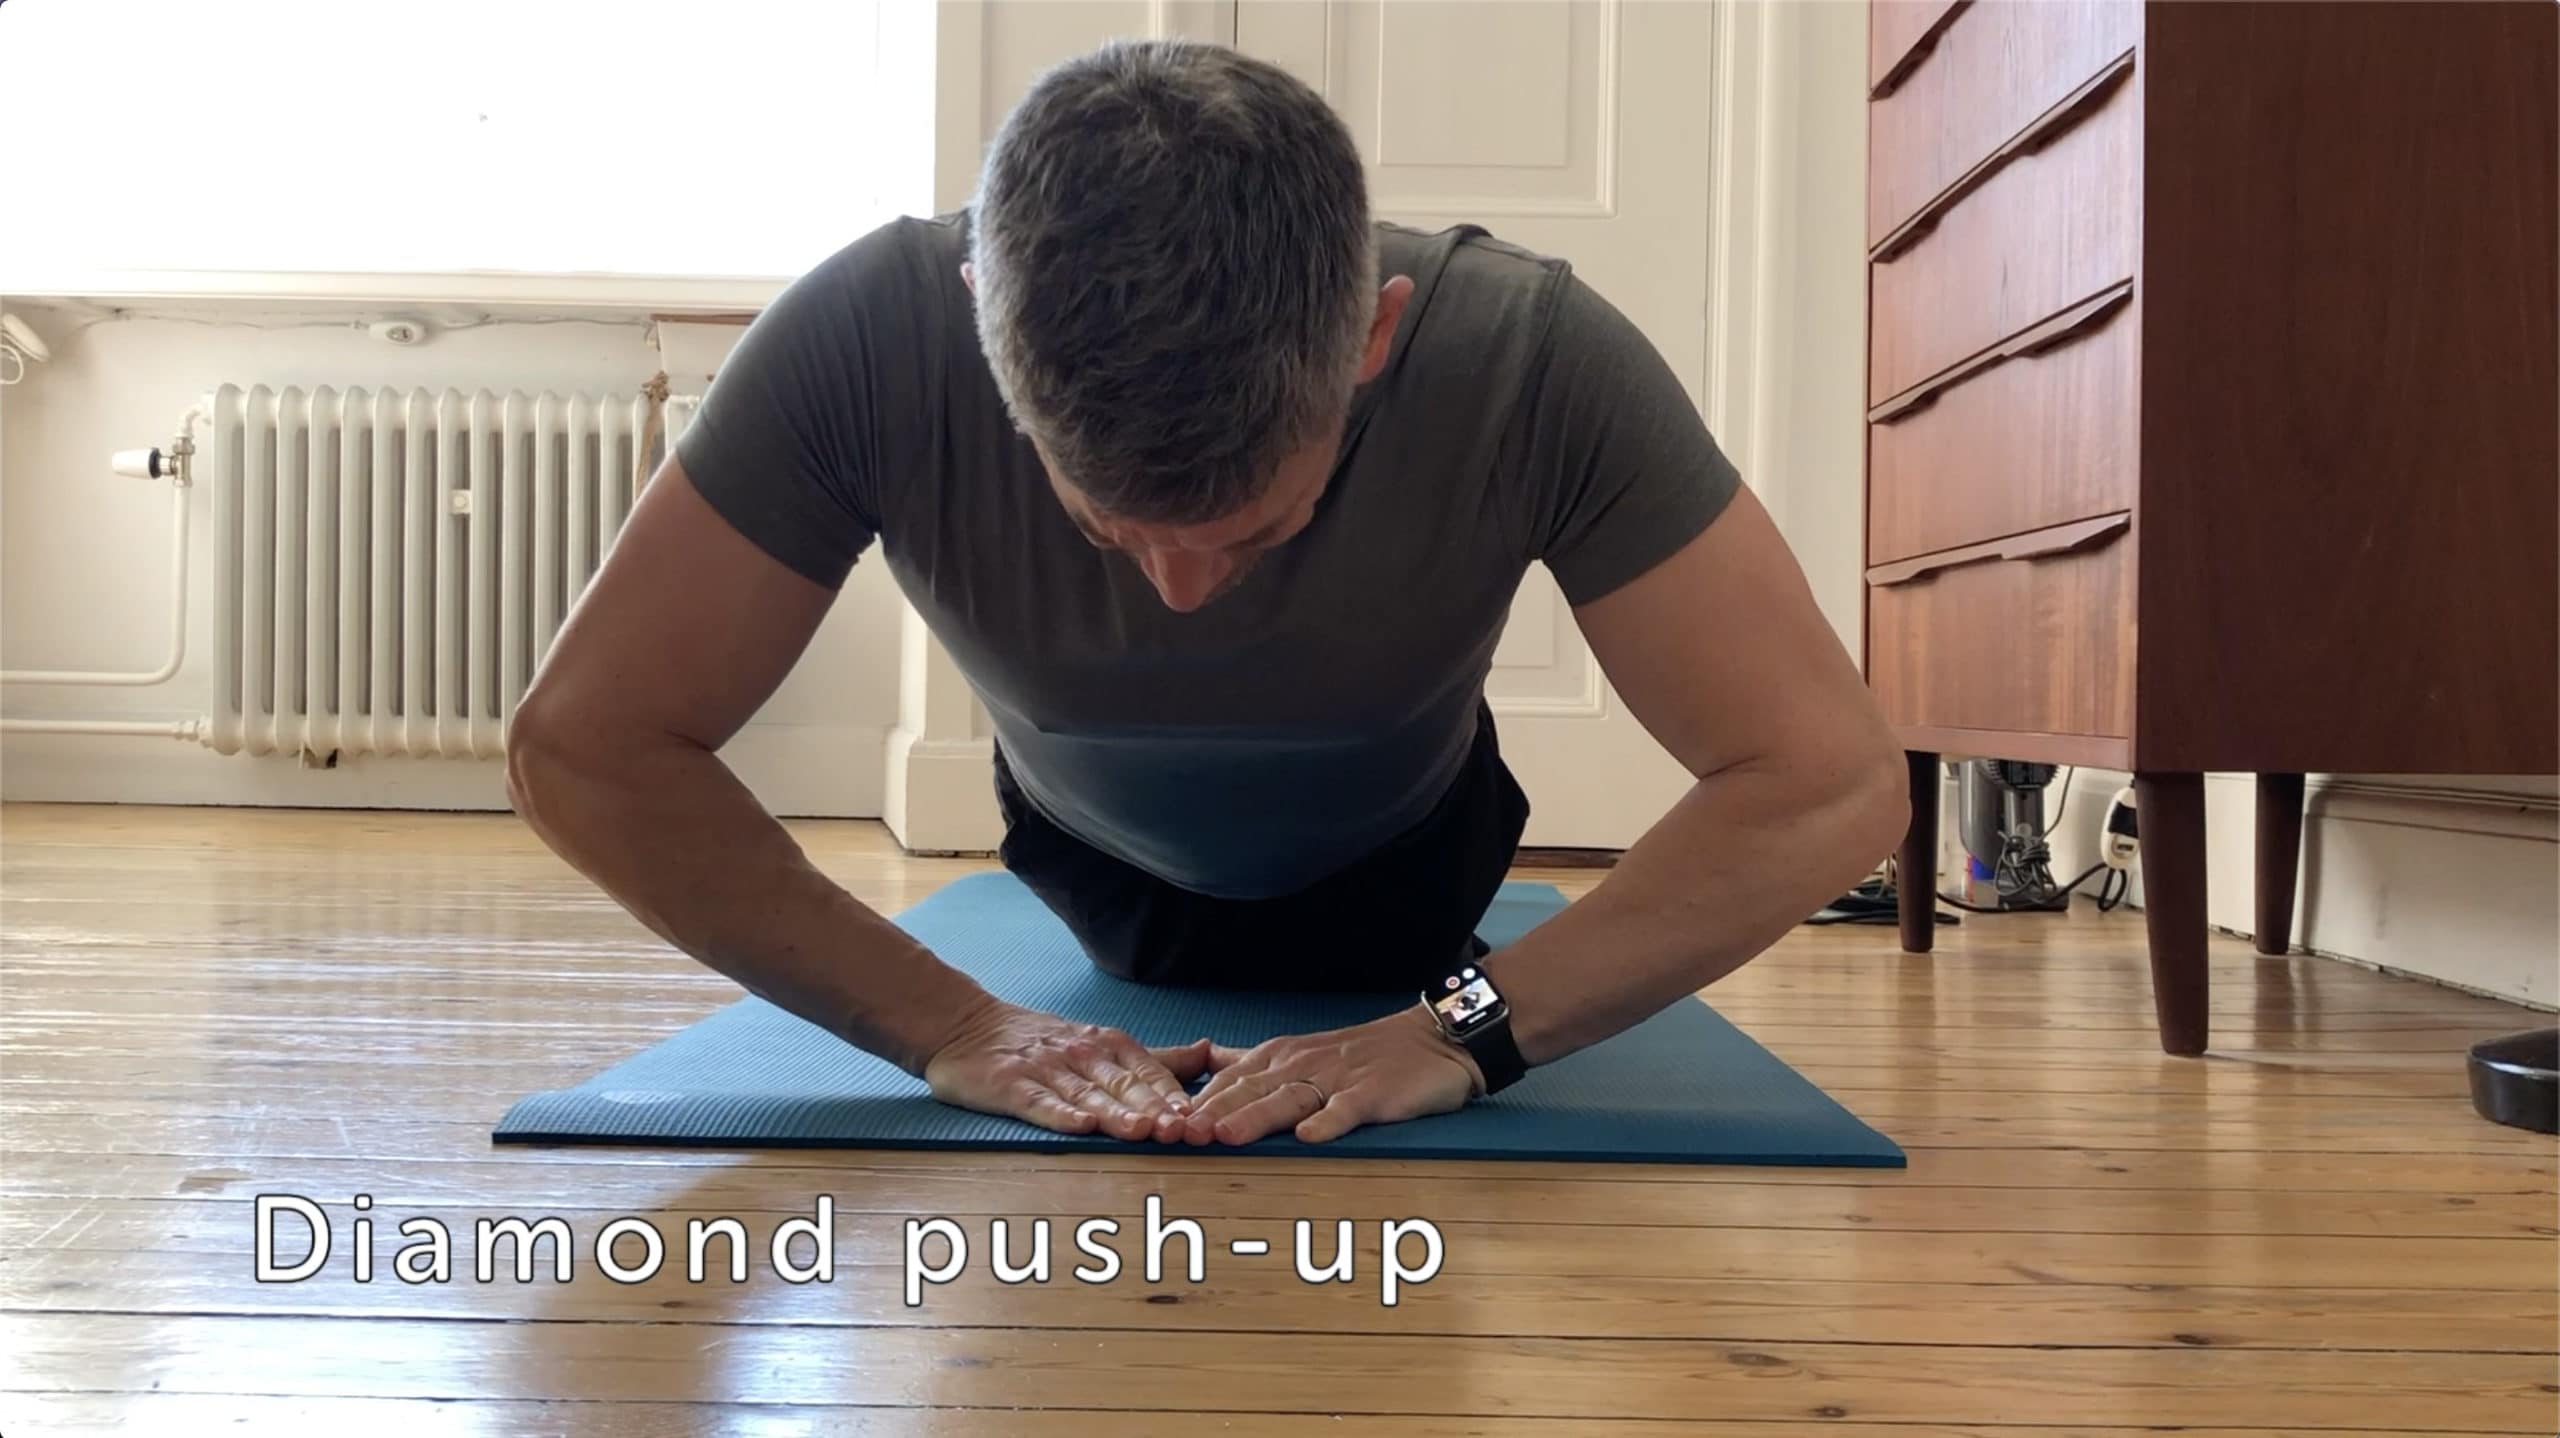 Bring your hands together for a more challenging pushup.